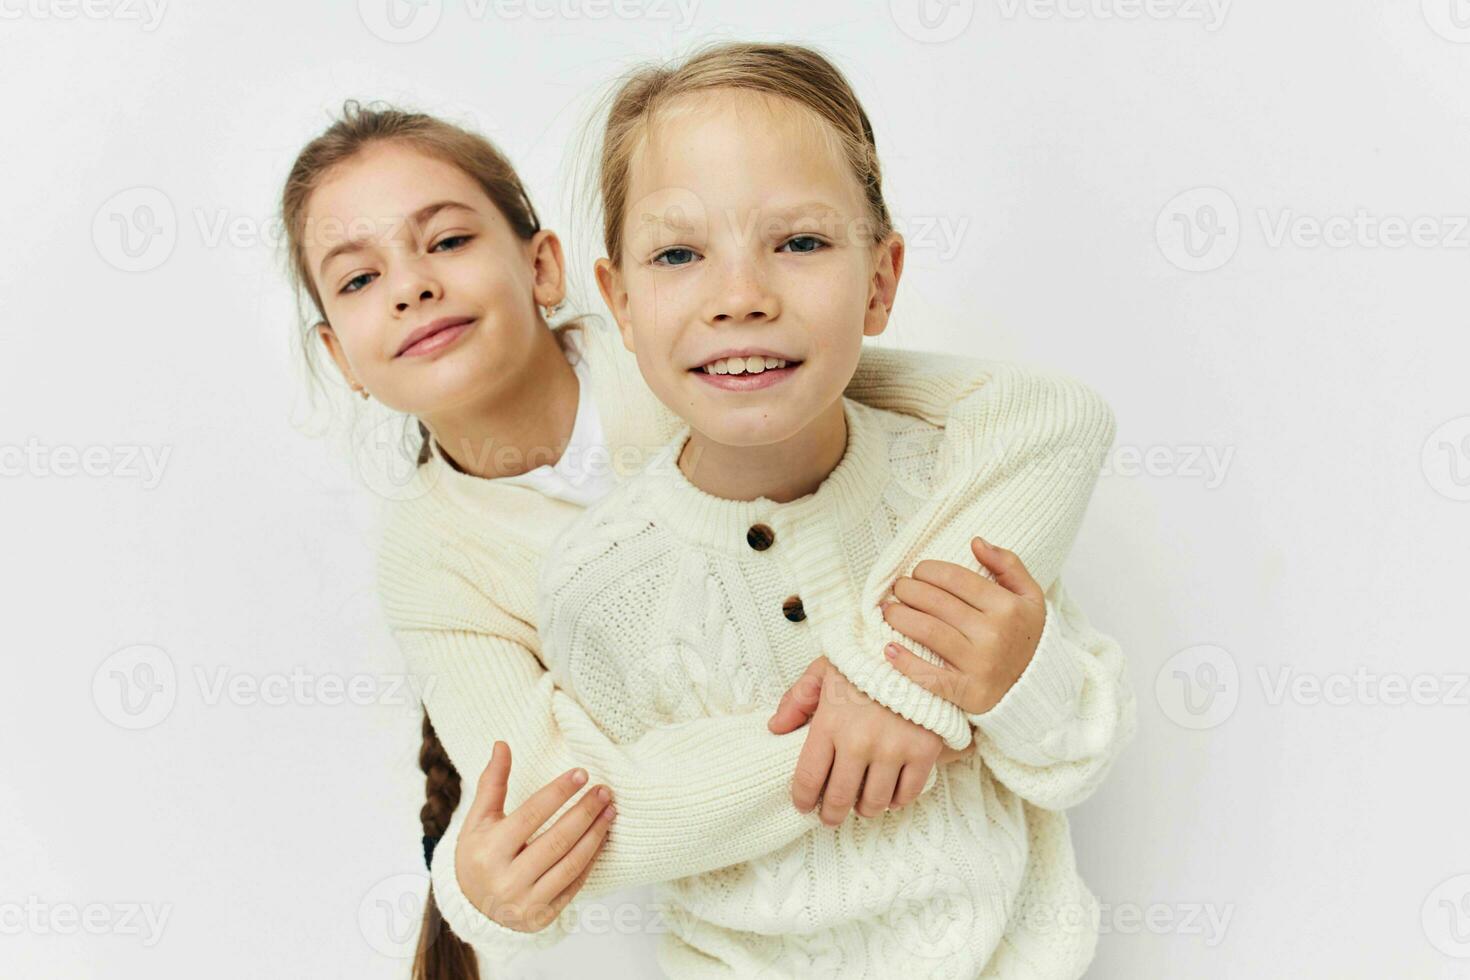 two friends are standing side by side fun childhood light background photo